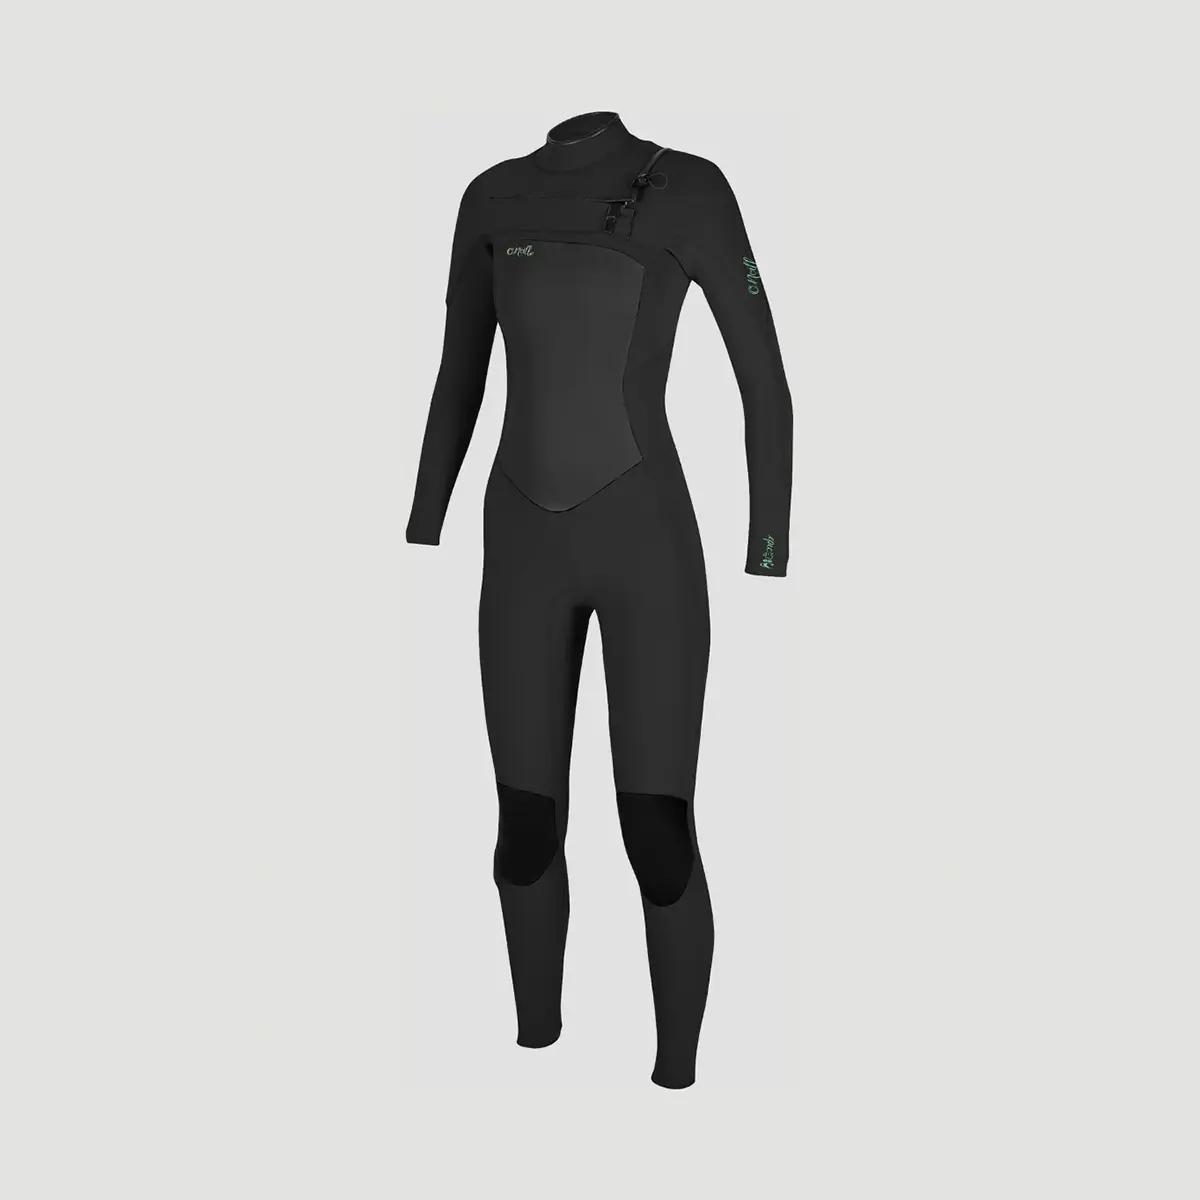 Portugal Surf Rentals - O'neill Wetsuit